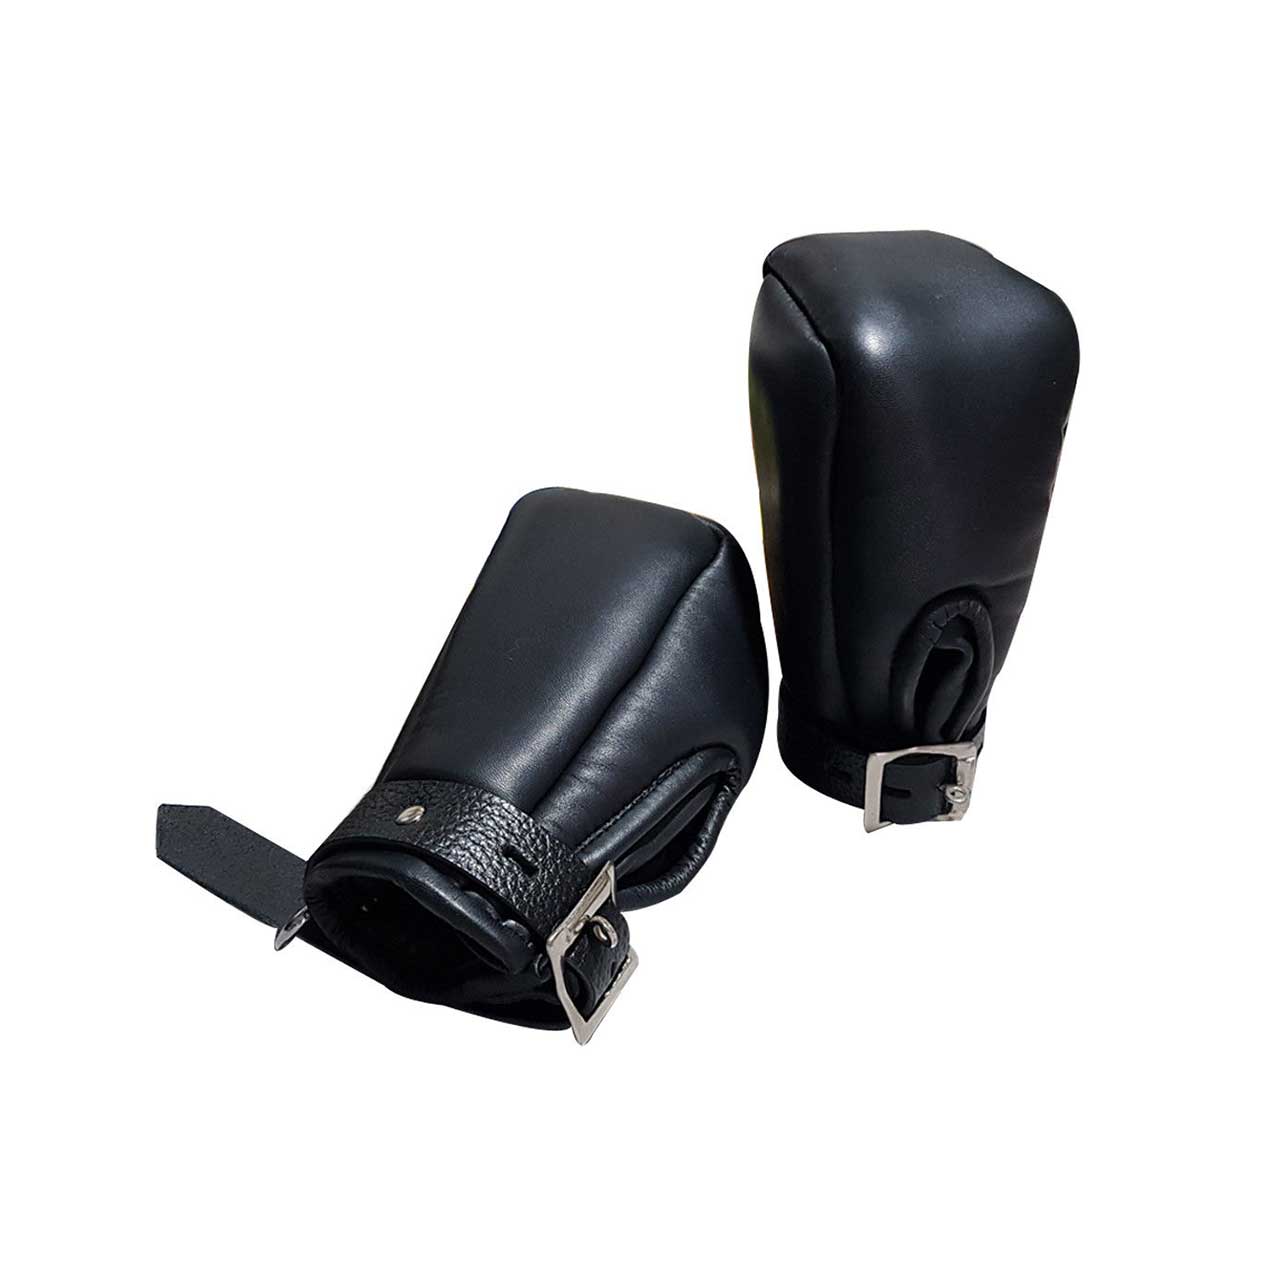 Unisex Black Leather Fist Mitts Gloves Sexy Padded Lined Bondage - Mitts2